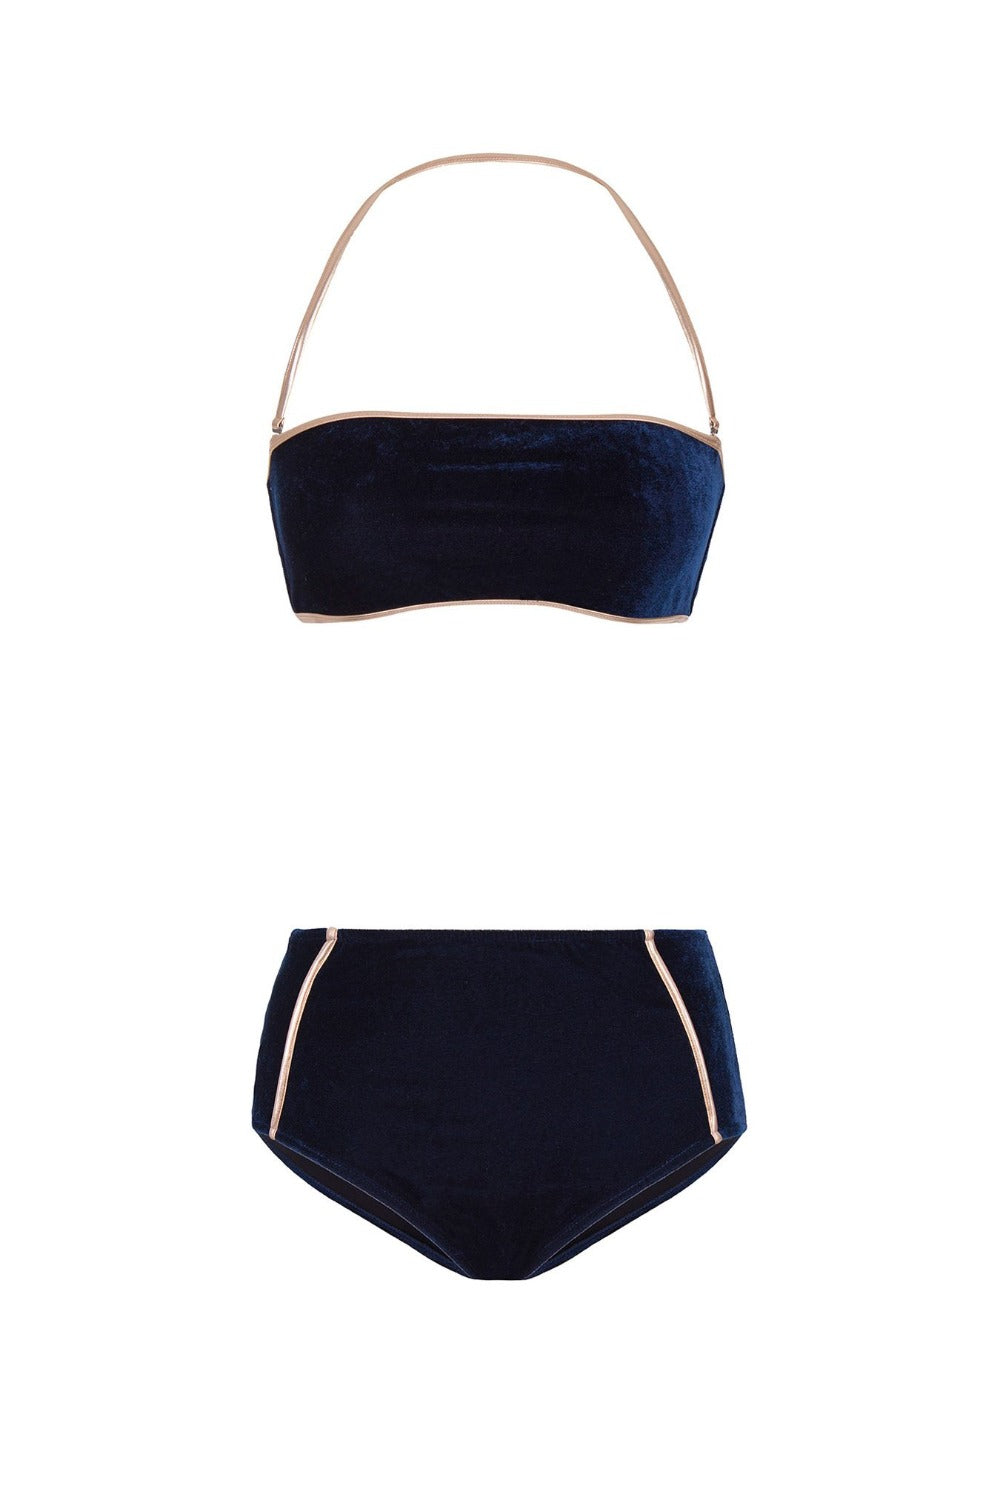 Strapless hot pants bikini is made from rich black/navy velvet with golden details around borders